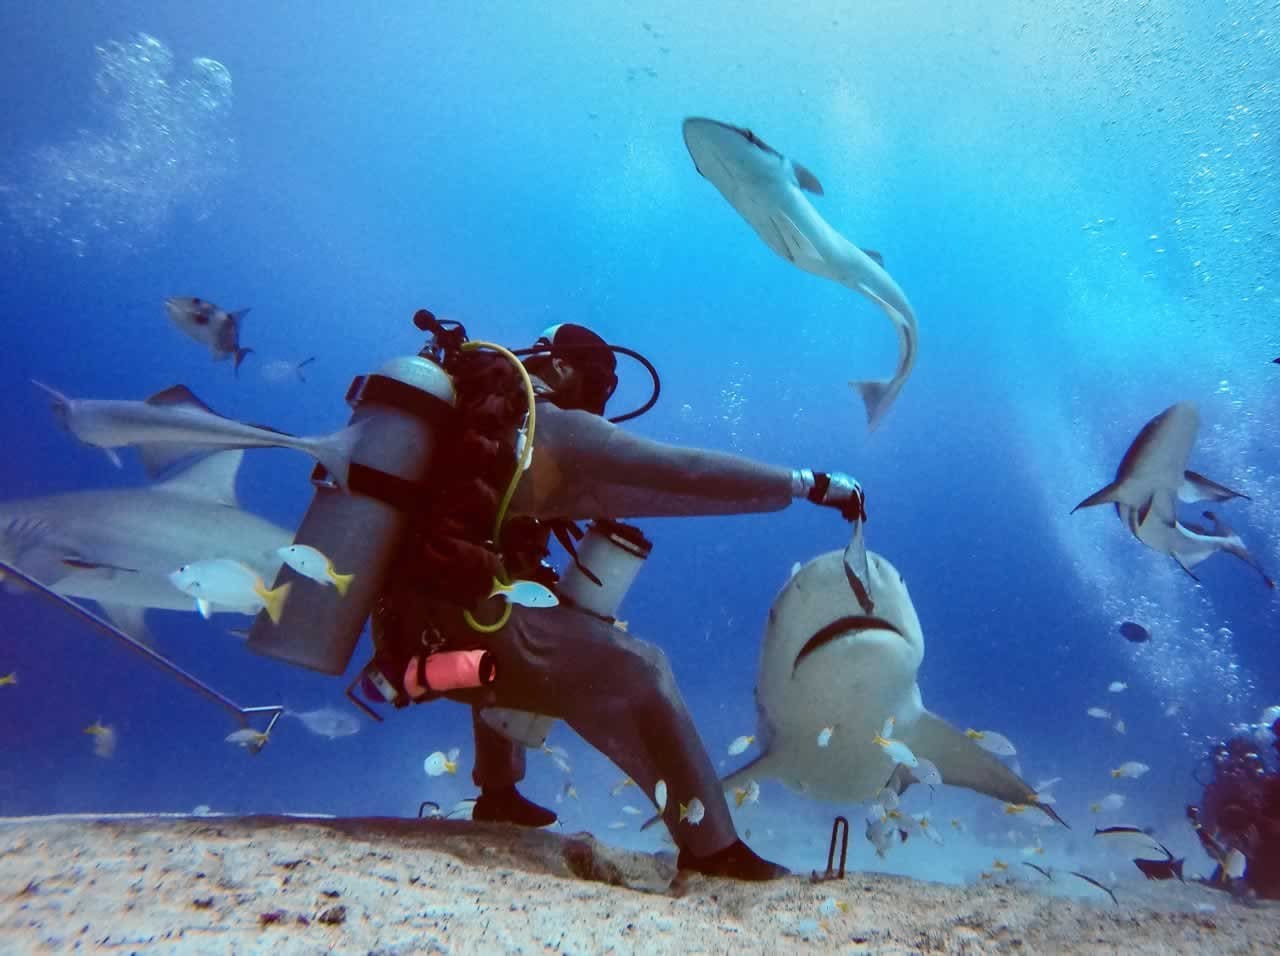 The Best Shark Diving Destinations for Your Adventure Second Honeymoon: Dive into Thrills and Create Unforgettable Memories